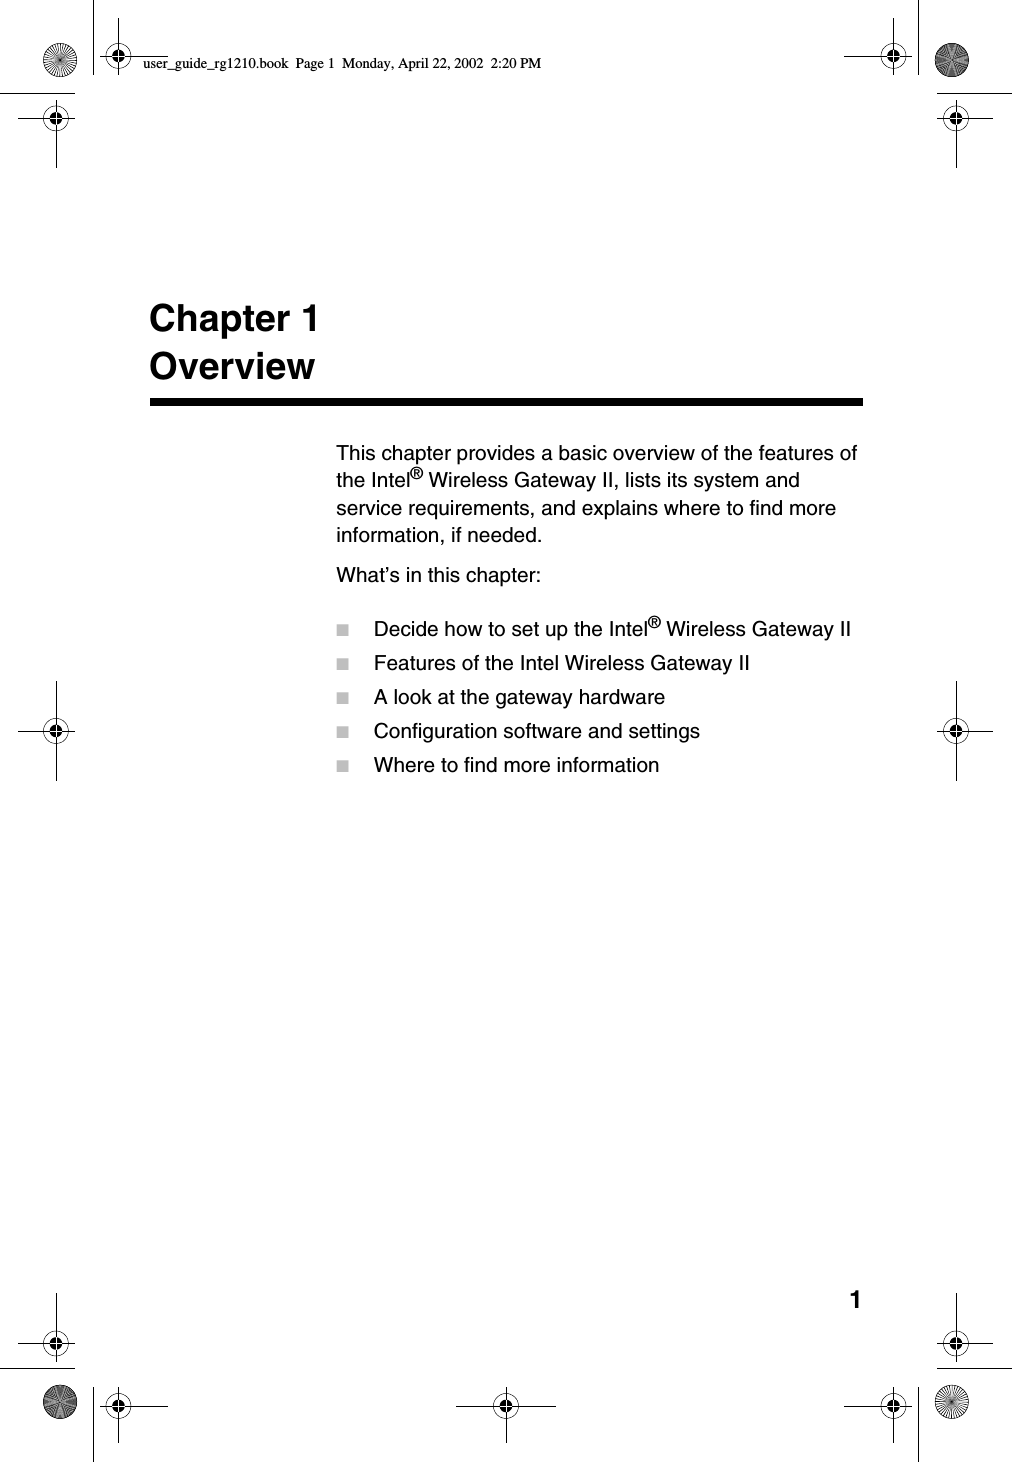 1Chapter 1OverviewThis chapter provides a basic overview of the features ofthe Intel®Wireless Gateway II, lists its system andservice requirements, and explains where to find moreinformation, if needed.What’s in this chapter:■Decide how to set up the Intel®Wireless Gateway II■Features of the Intel Wireless Gateway II■A look at the gateway hardware■Configuration software and settings■Where to find more informationuser_guide_rg1210.book Page 1 Monday, April 22, 2002 2:20 PM